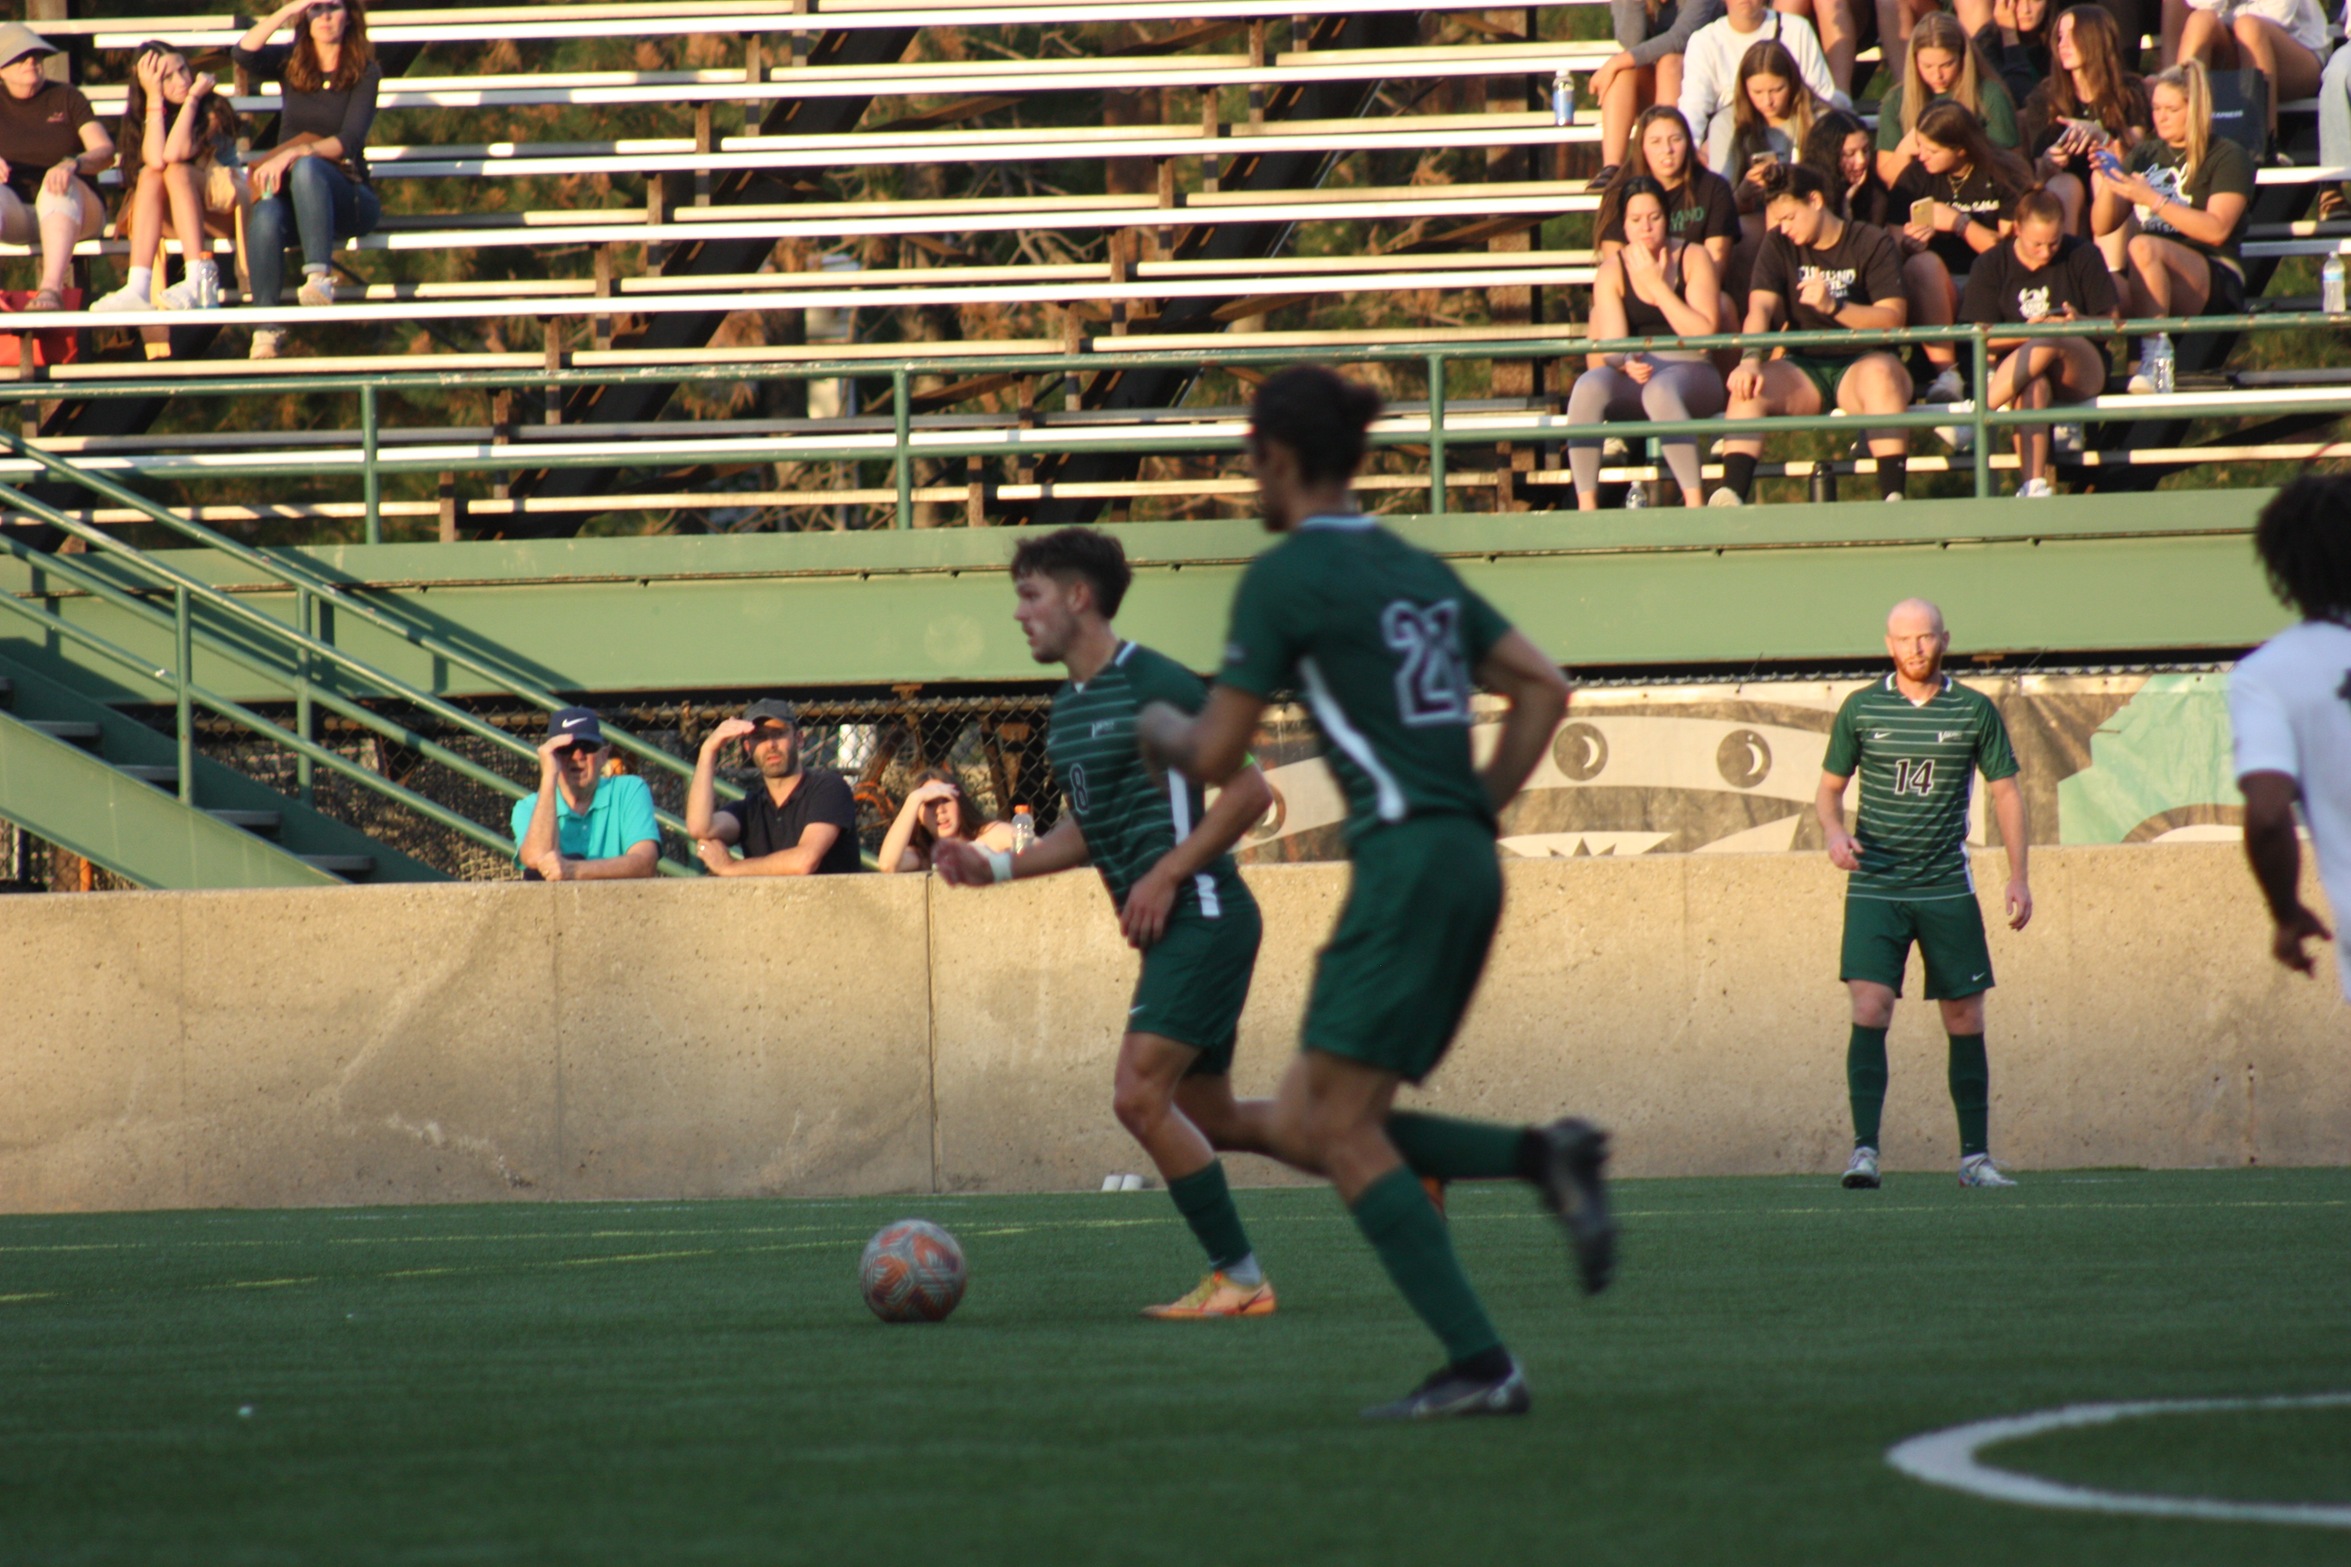 Schmidt Scores Twice to Propel Cleveland State Past UIC, 2-1